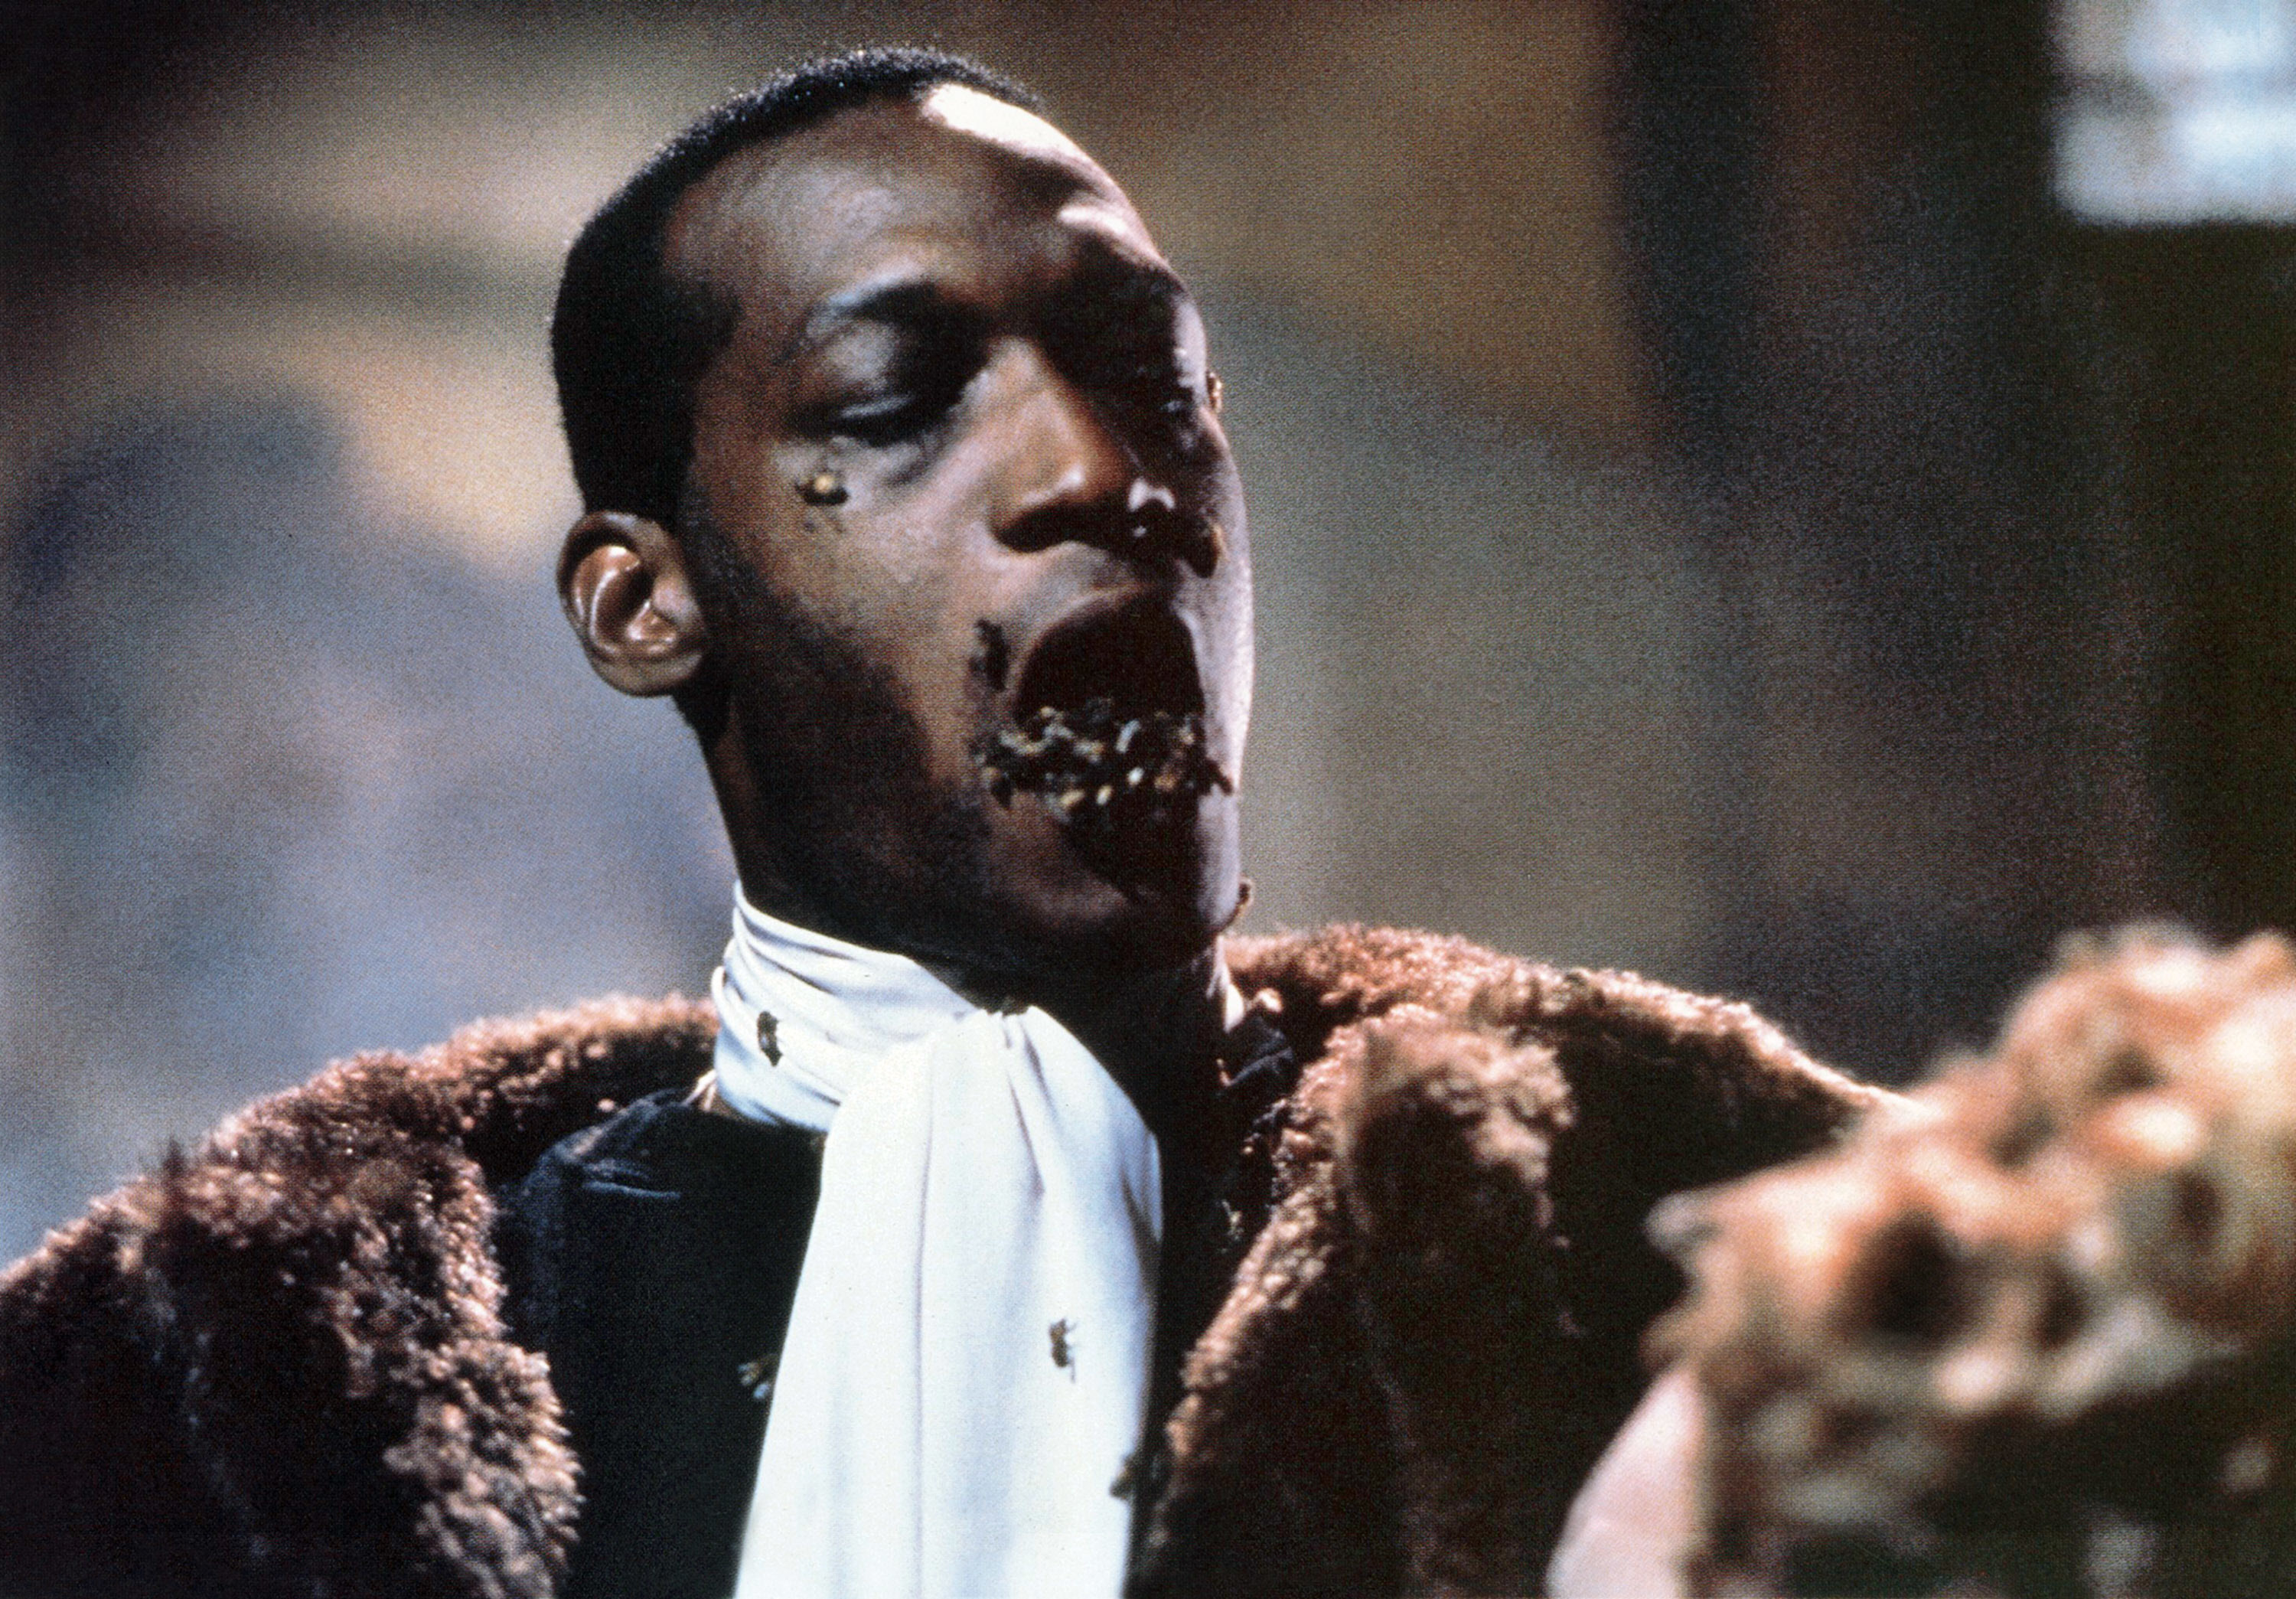 Tony Todd with bees coming out of his mouth